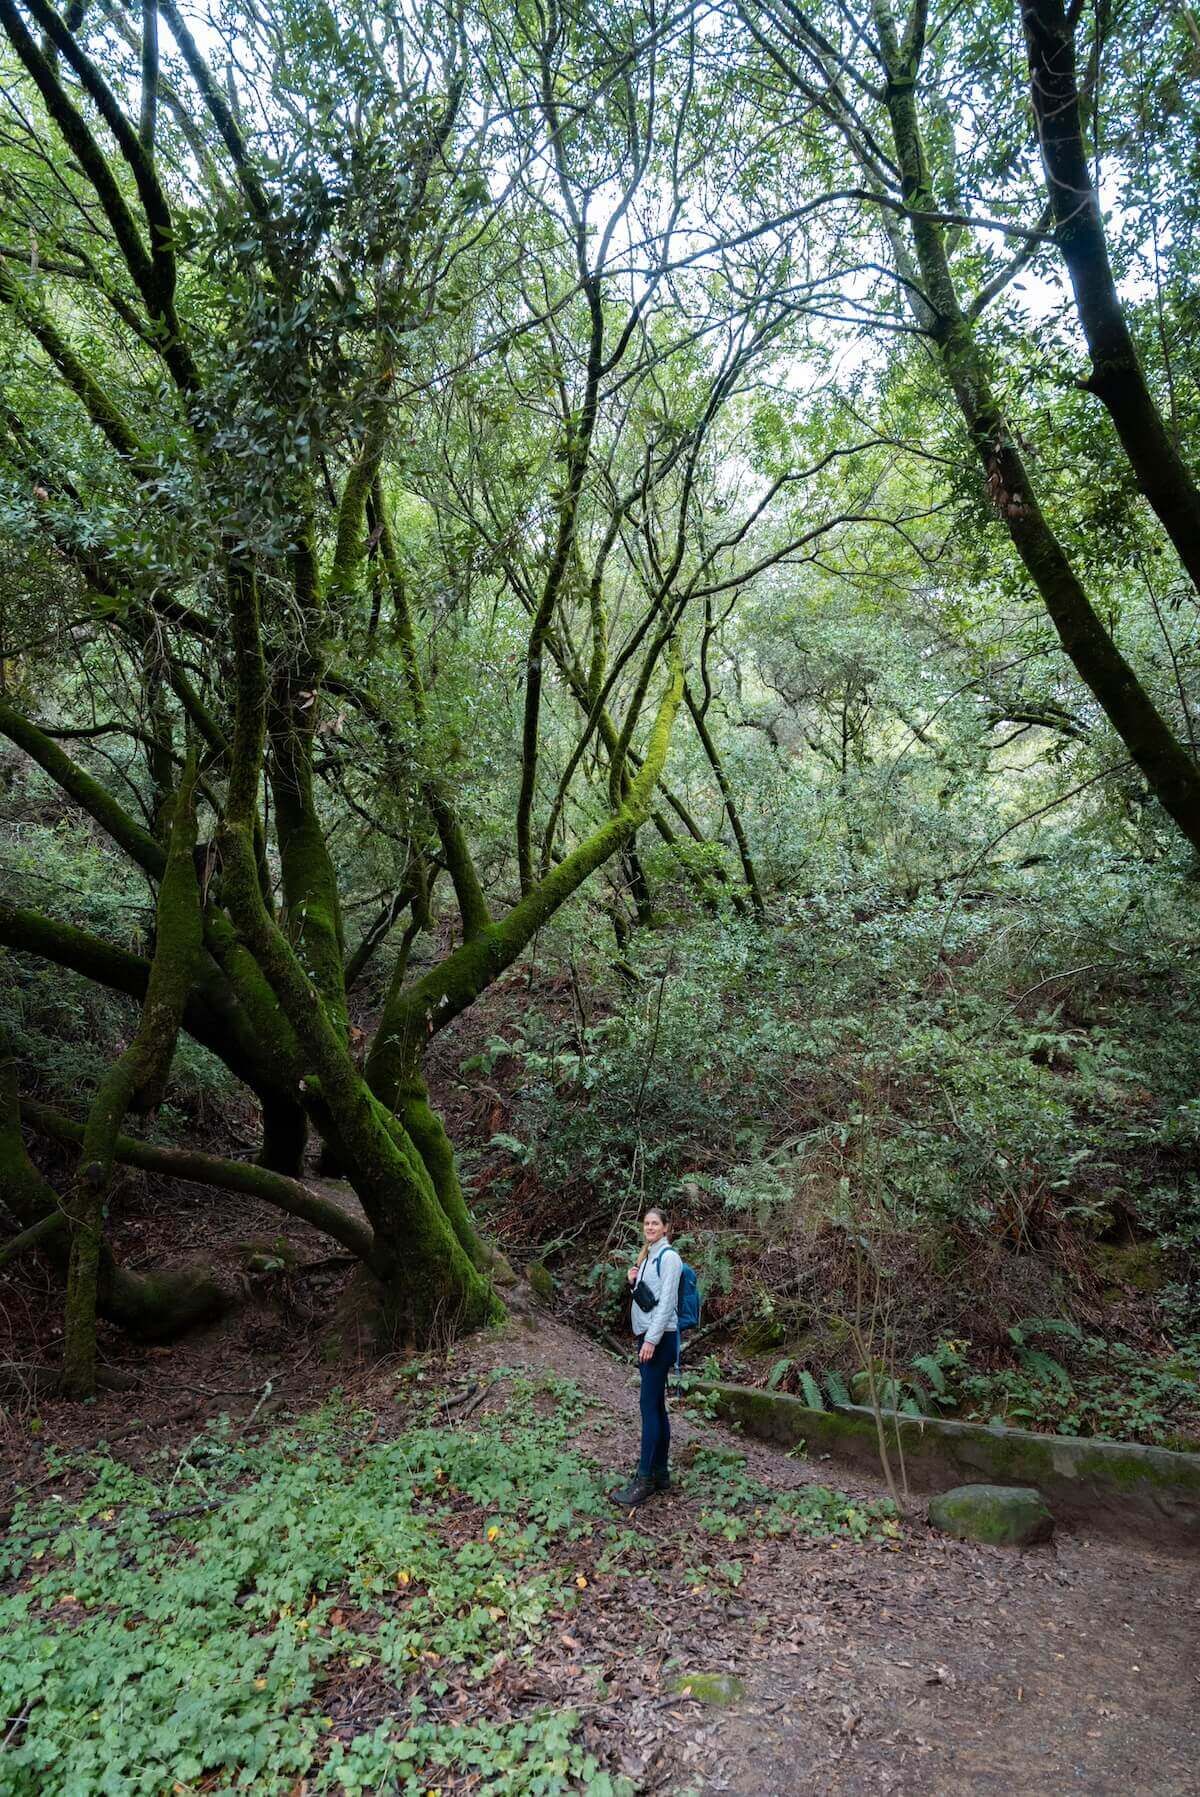 A female hiker stands looking back at the camera on a forest path in front of a moss-covered tree.